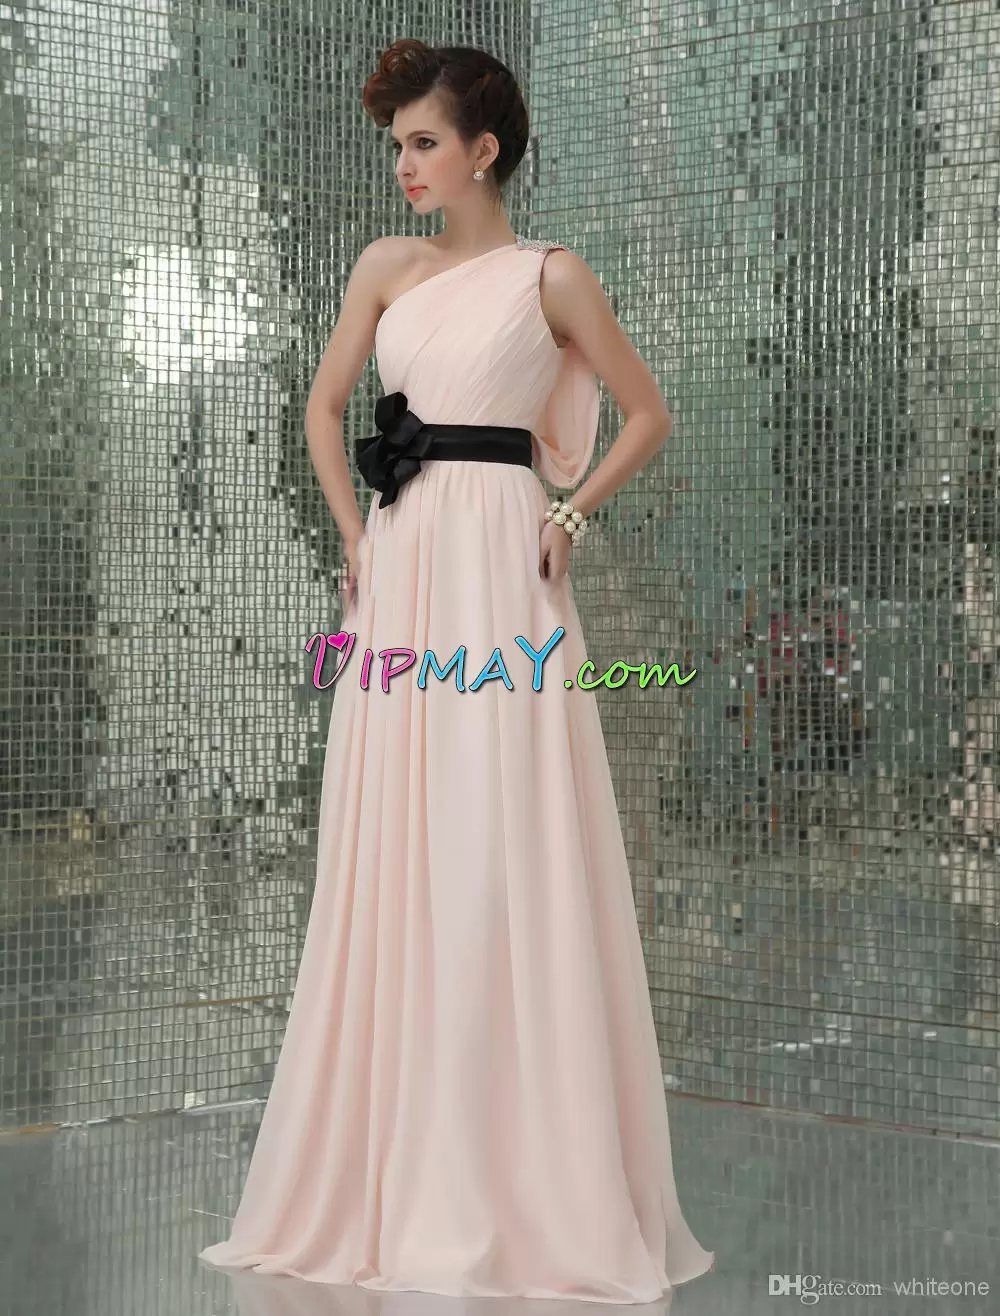 pale pink long prom dress,one shoulder prom dress chiffon,one shoulder formal dress,chiffon beach prom dress,chiffon flowy prom dress,sleeveless prom dress with belt,pink and black prom dress,